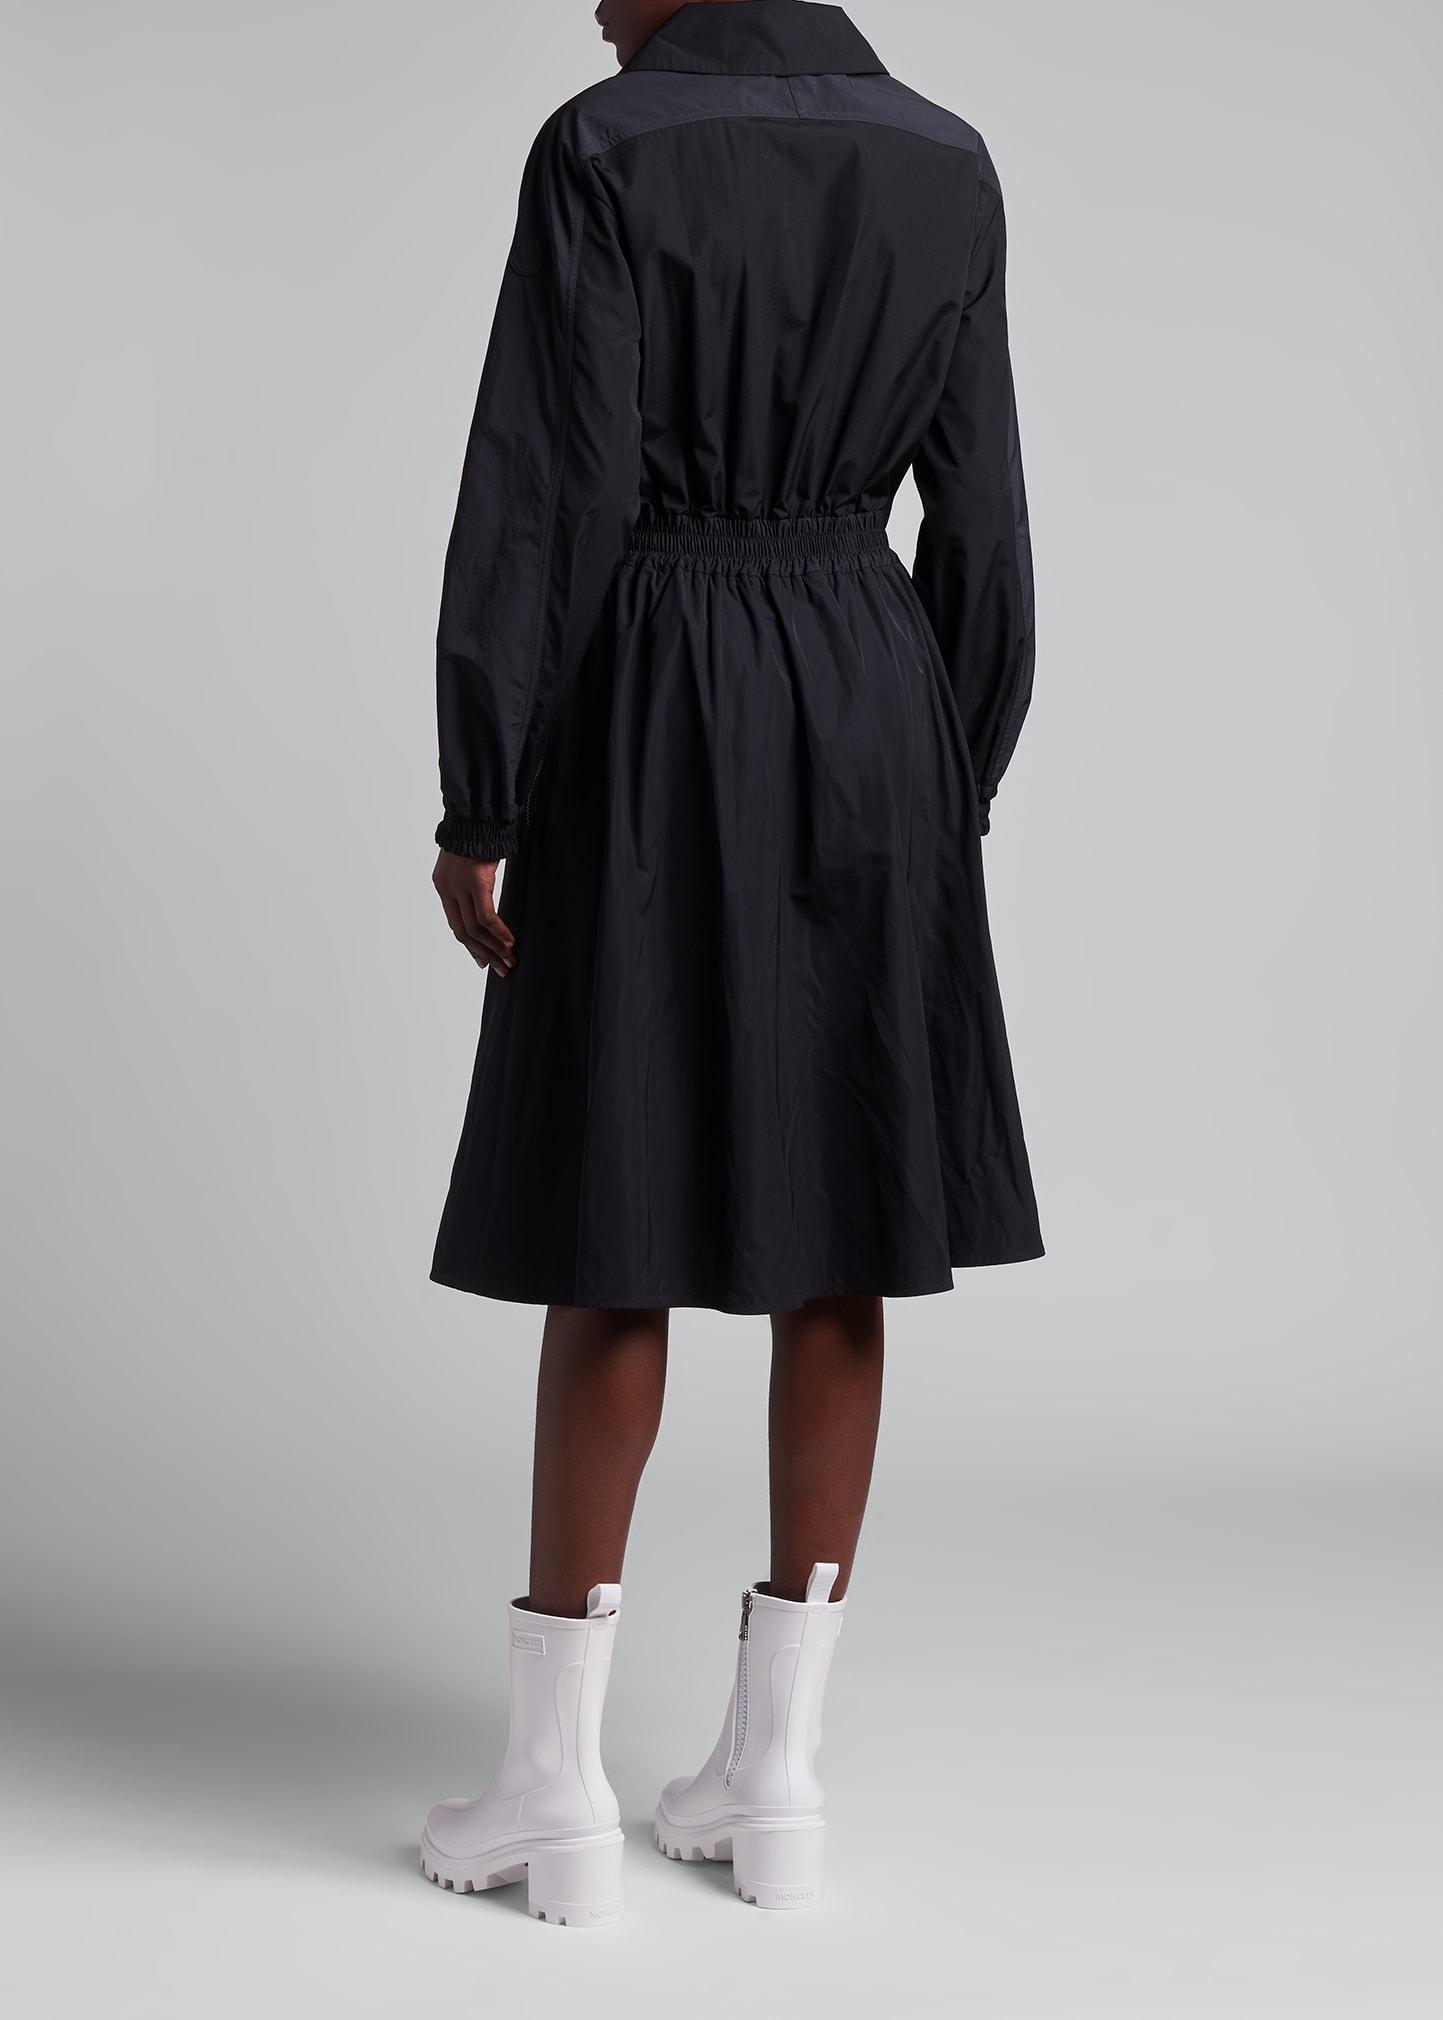 Moncler Zip-up A-line Utility Dress in Black | Lyst